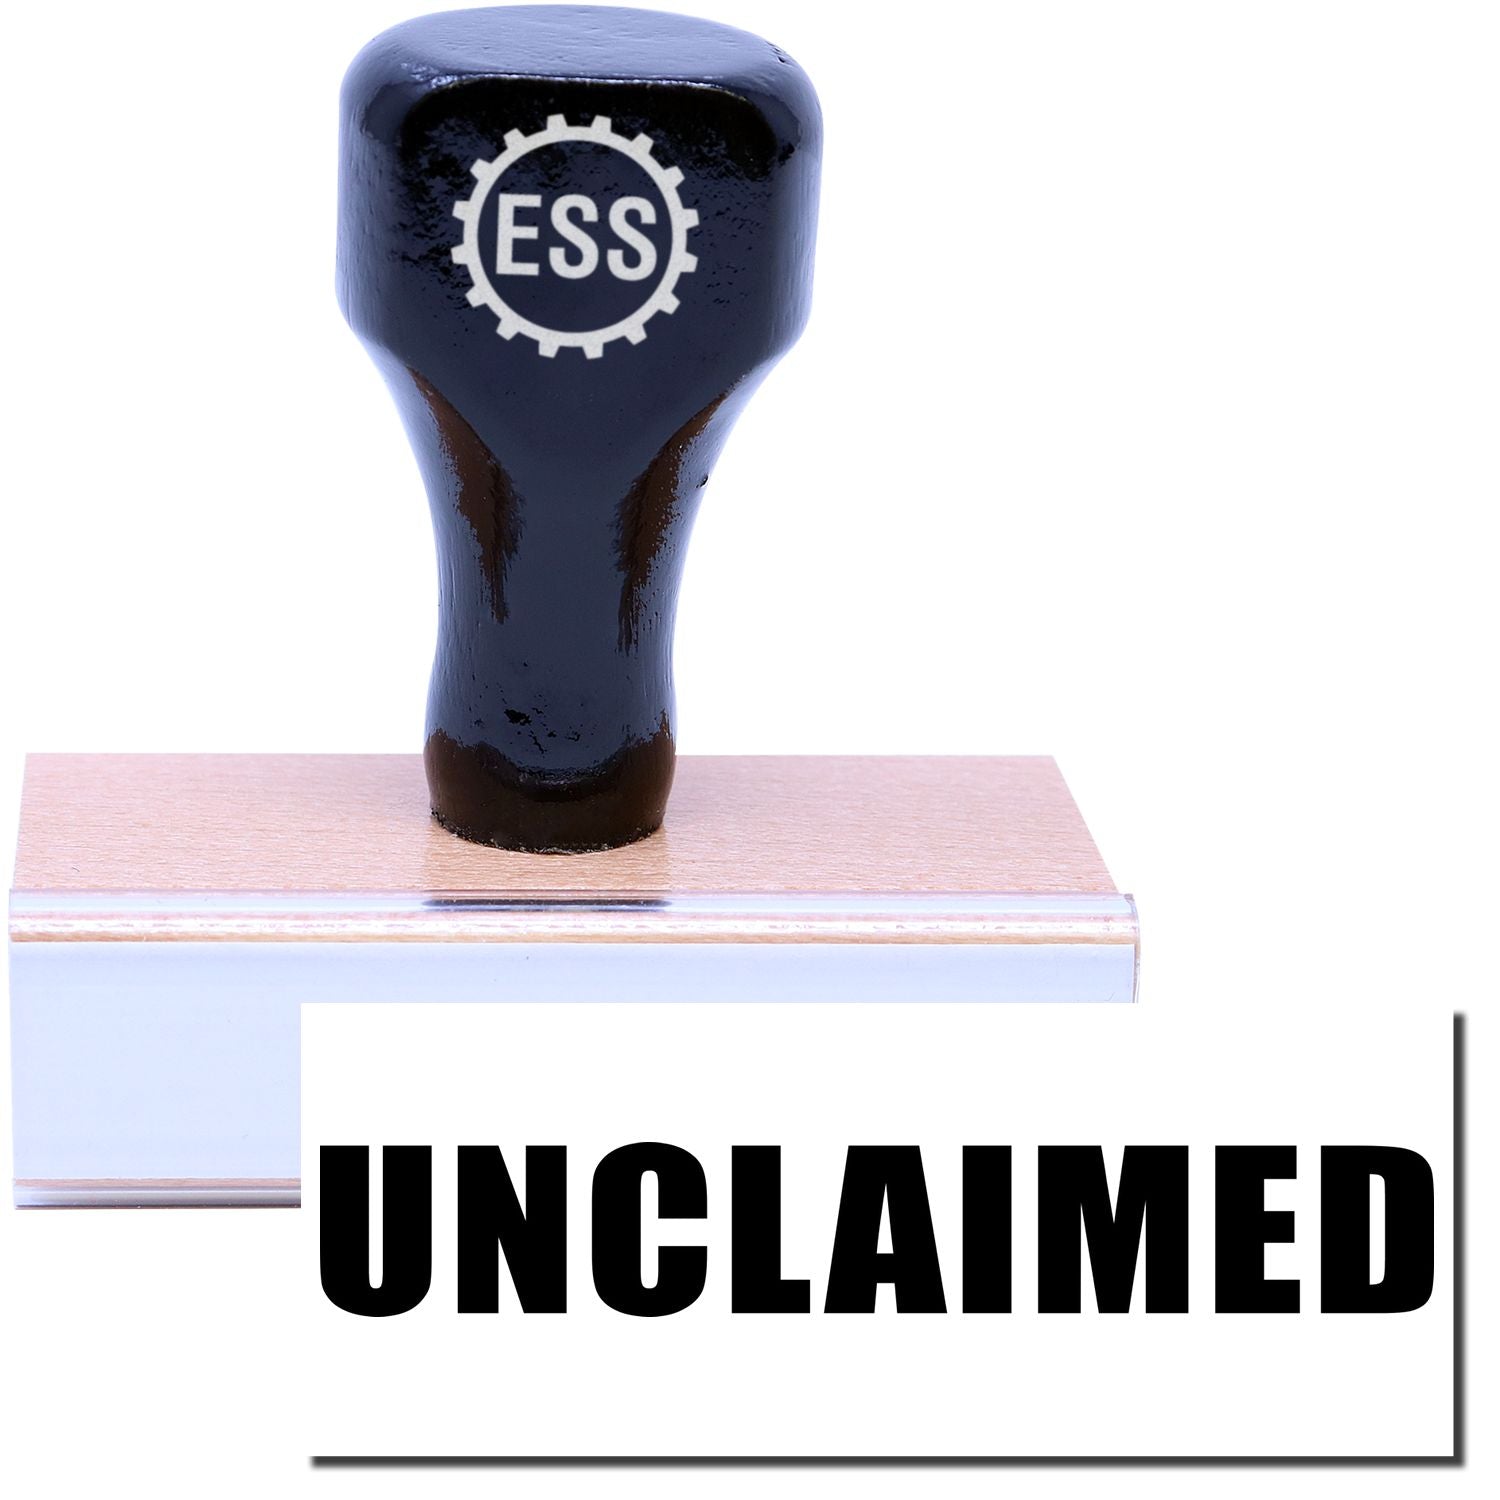 A stock office rubber stamp with a stamped image showing how the text "UNCLAIMED" in a large font is displayed after stamping.